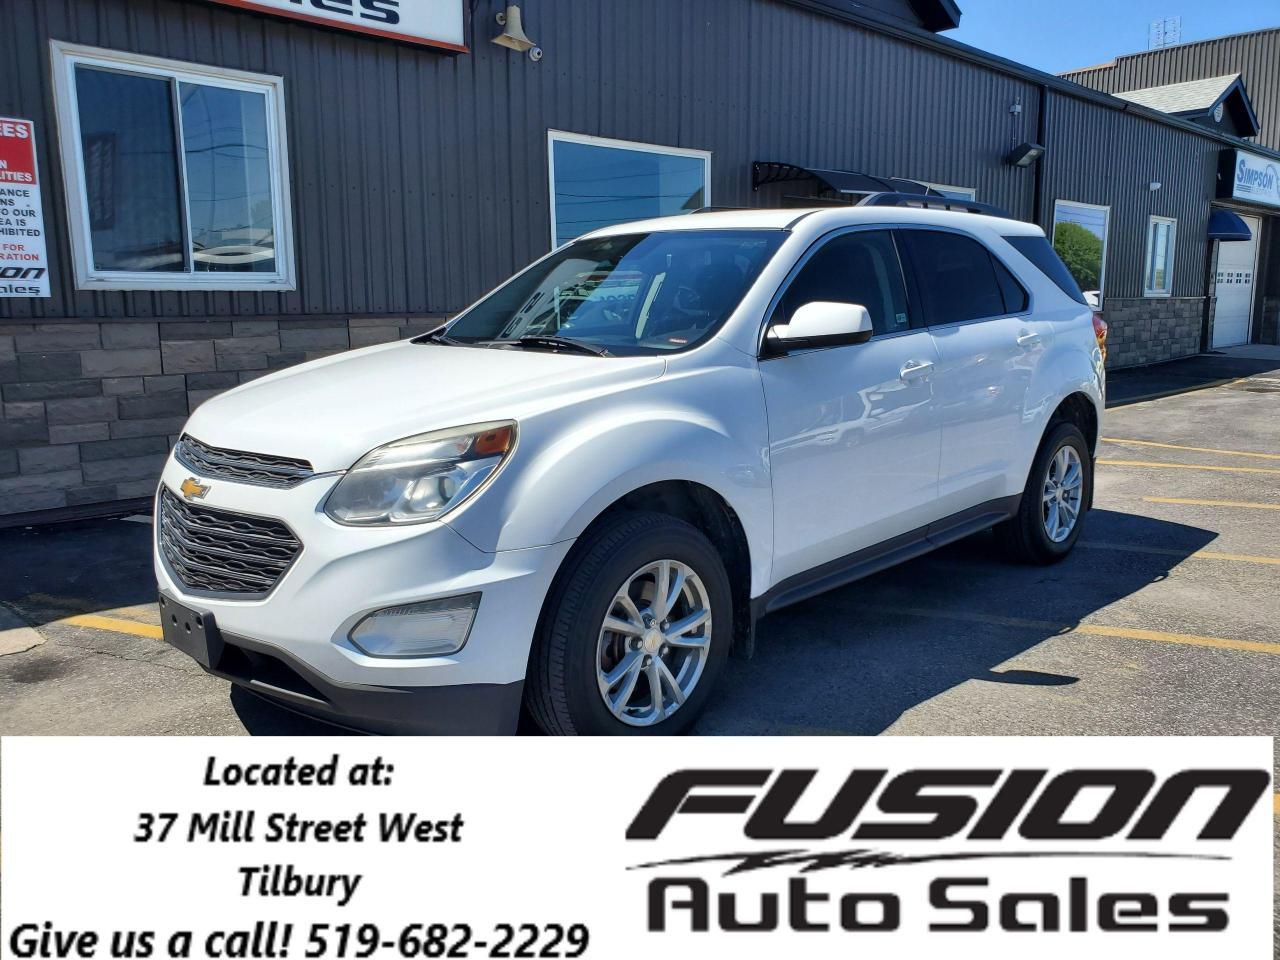 2017 Chevrolet Equinox AWD LT V6-NO HST TO MAX OF $2000 LTD TIME ONLY